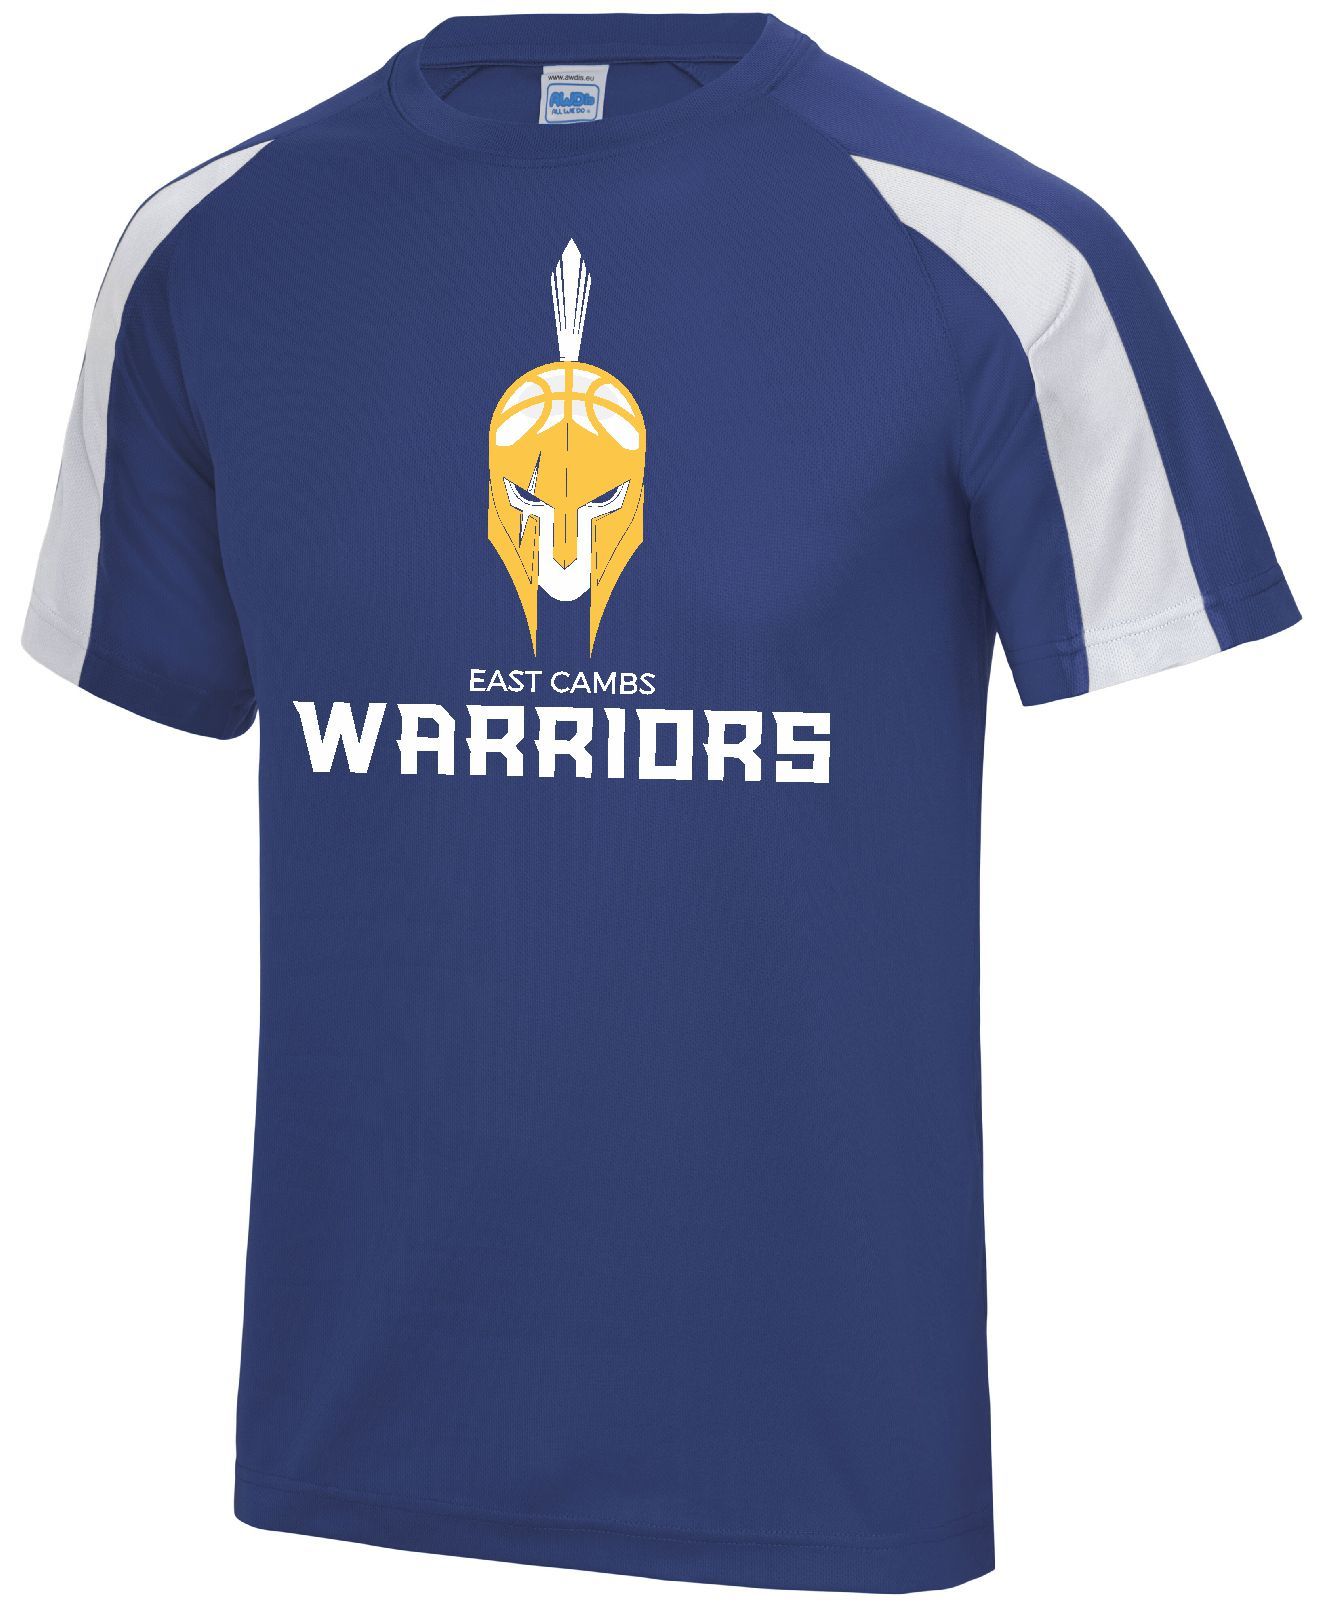 Warriors - Performance Contrast Tee (Royal Blue/White)